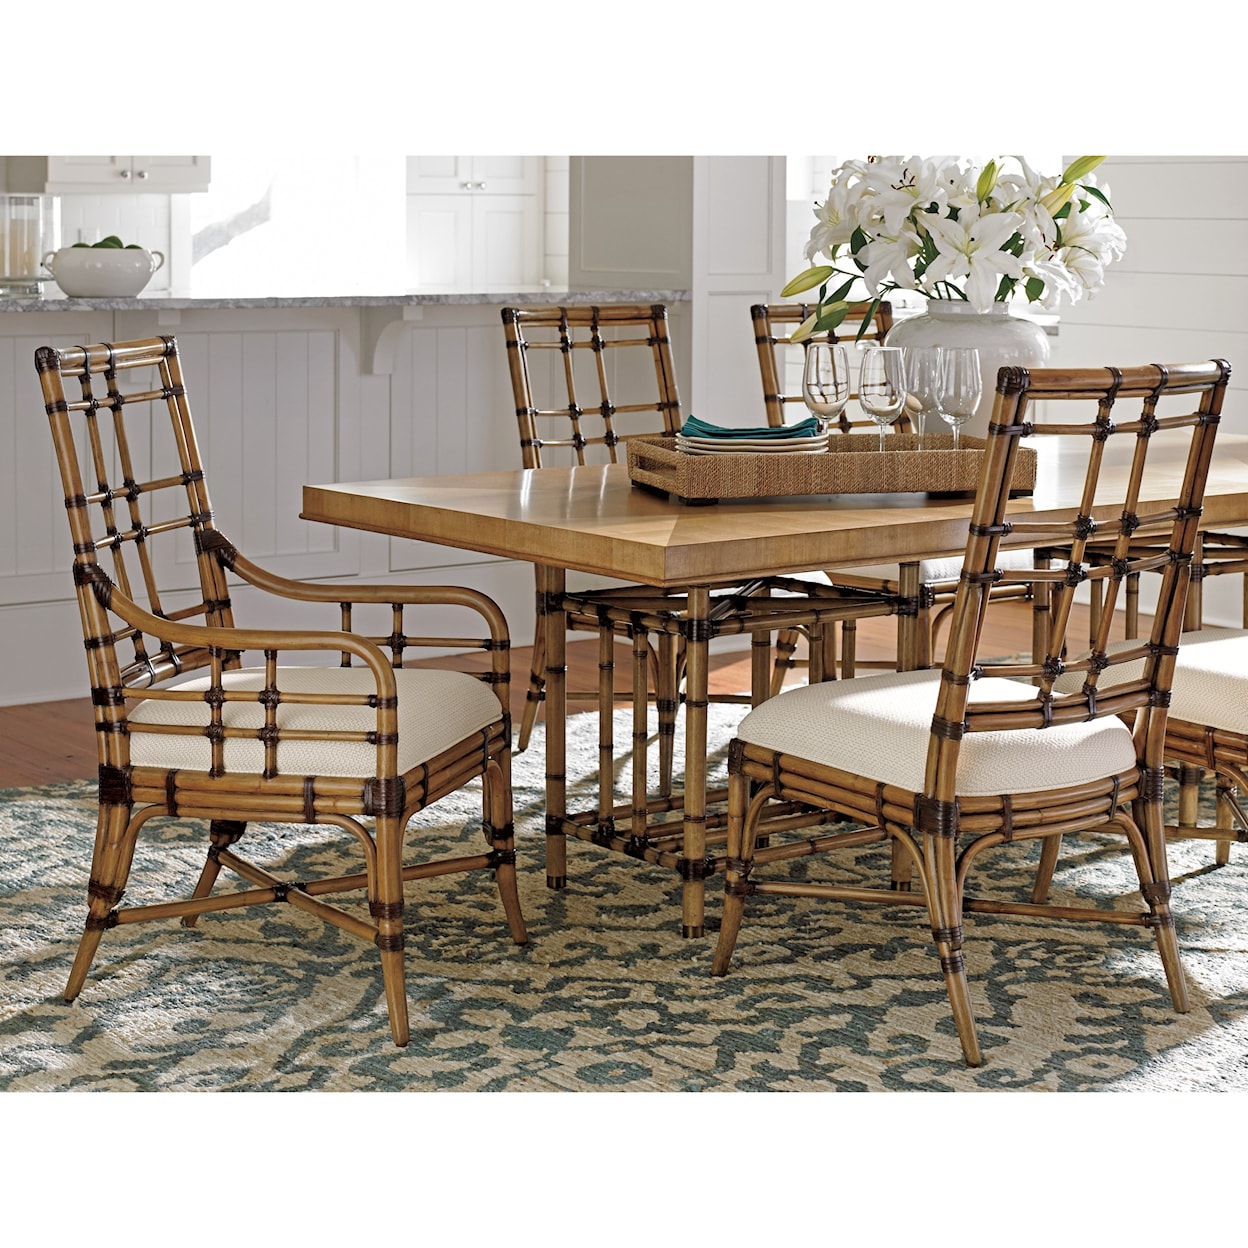 Tommy Bahama Home Twin Palms Caneel Bay Dining Table